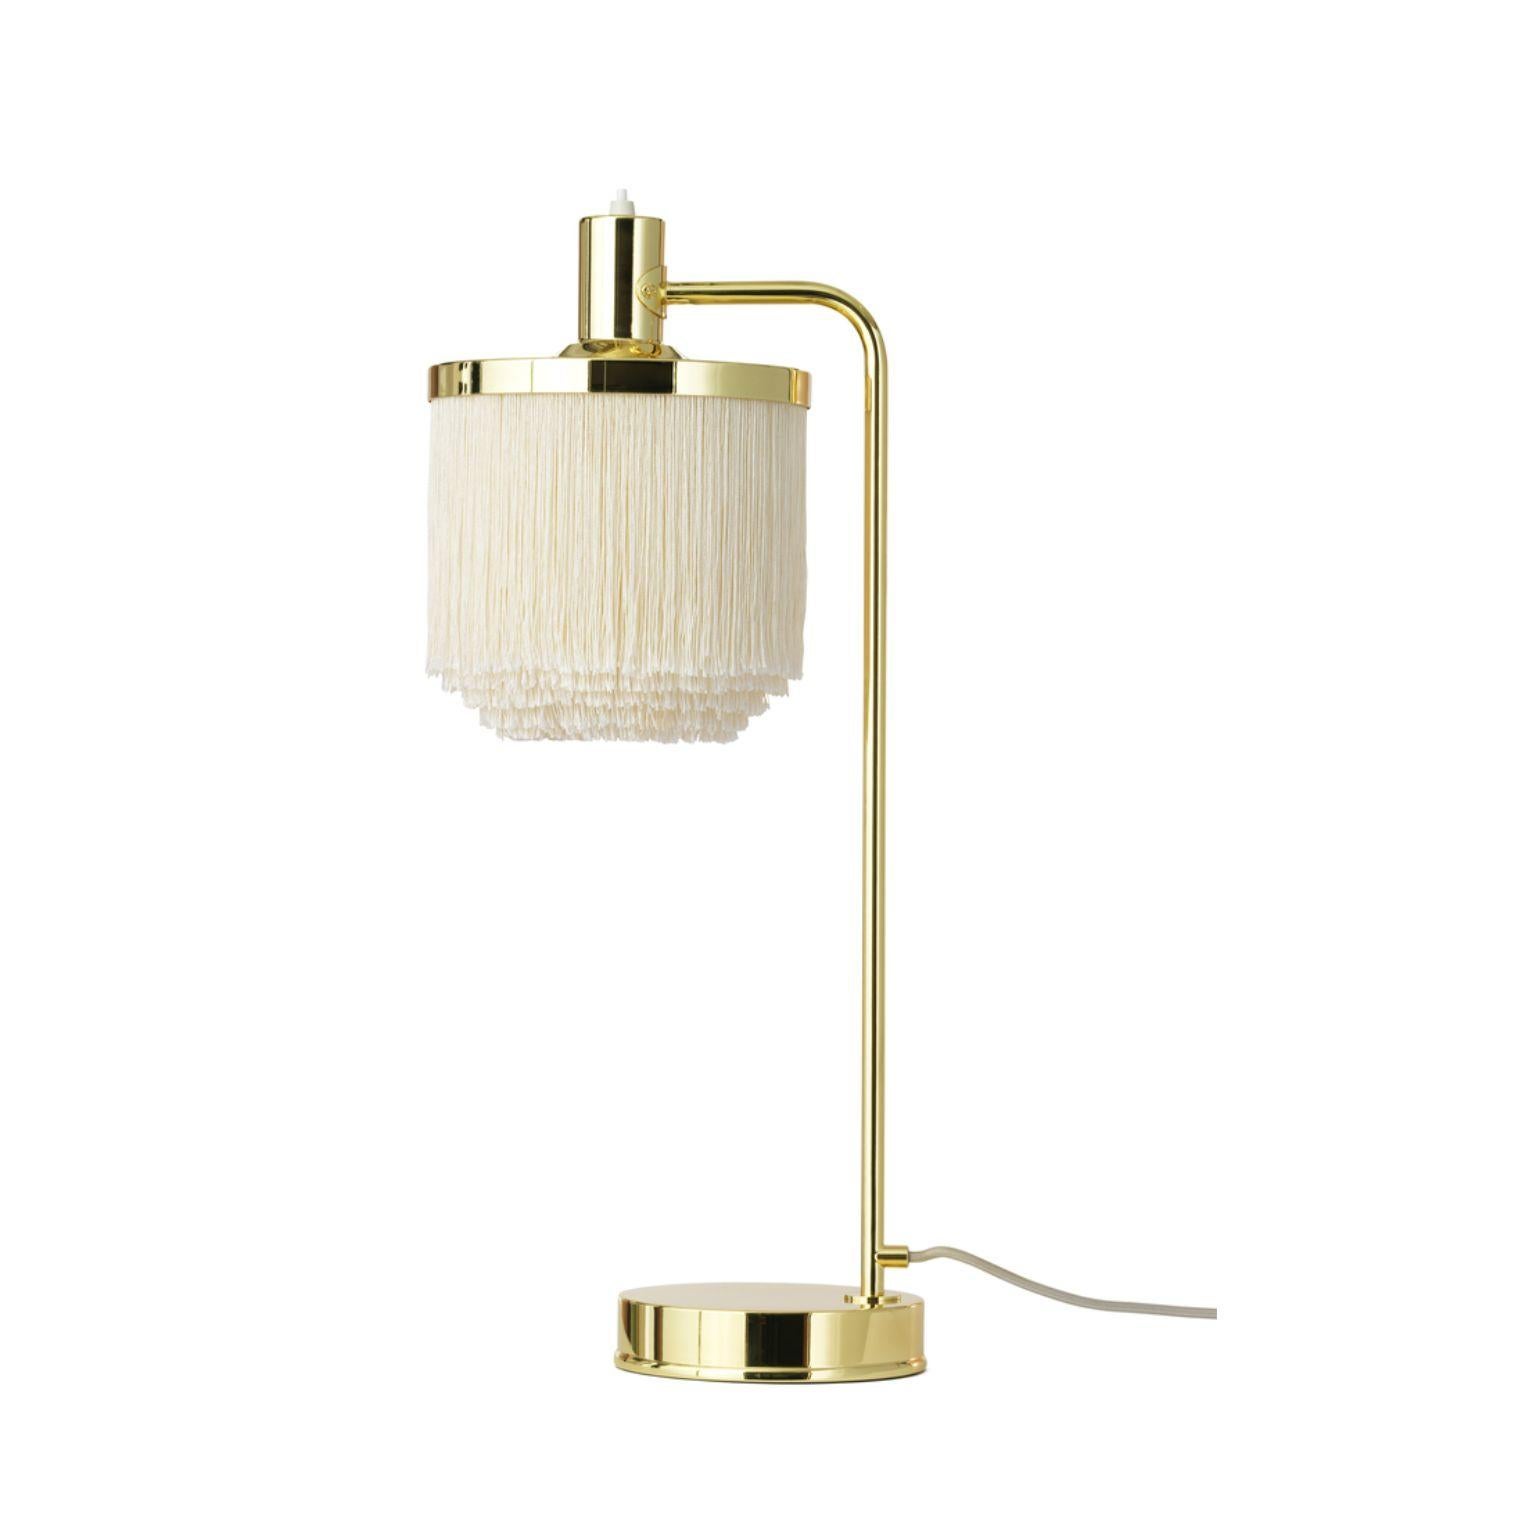 Fringe cream white table lamp by Warm Nordic
Dimensions: D 20 x W 26 x H 61 cm
Material: Brass plated steel, Viscose fringes
Weight: 1 kg
Also available in different colours.

An iconic table lamp with sophisticated fringes, created in 1960 by